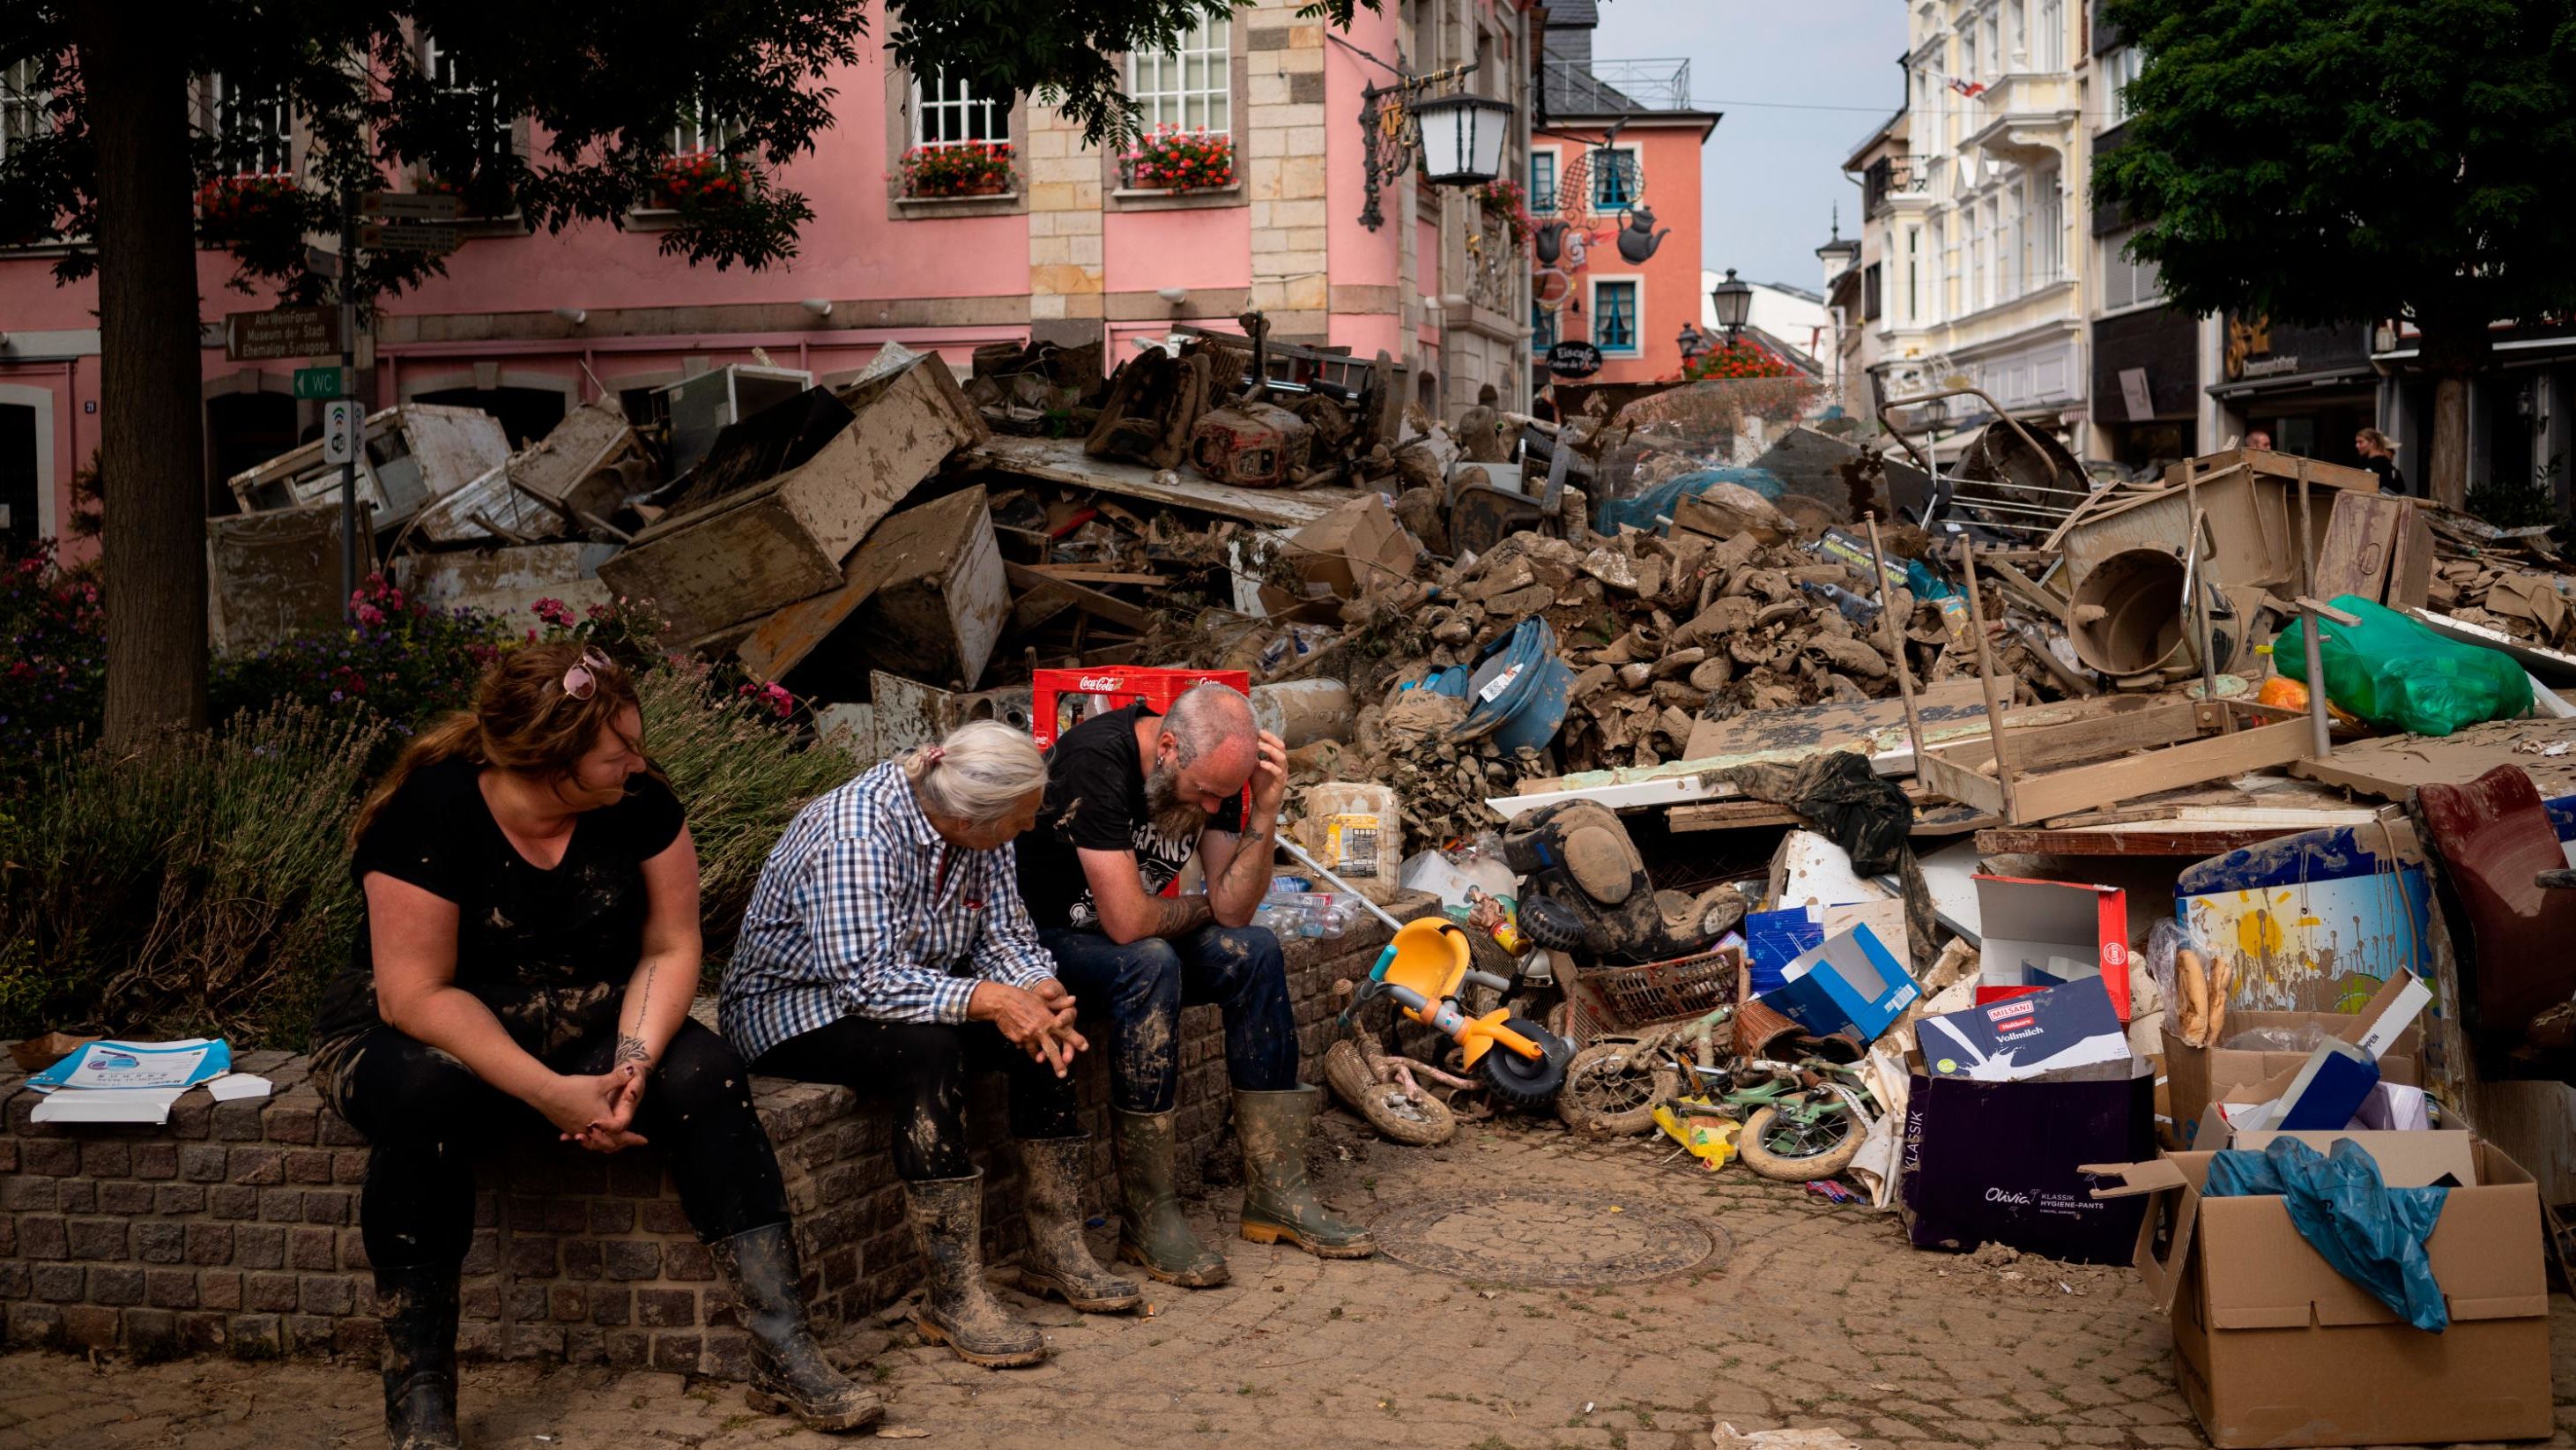 People take a break from cleaning up after flooding in Bad Neuenahr-Ahrweiler, Germany, in July.